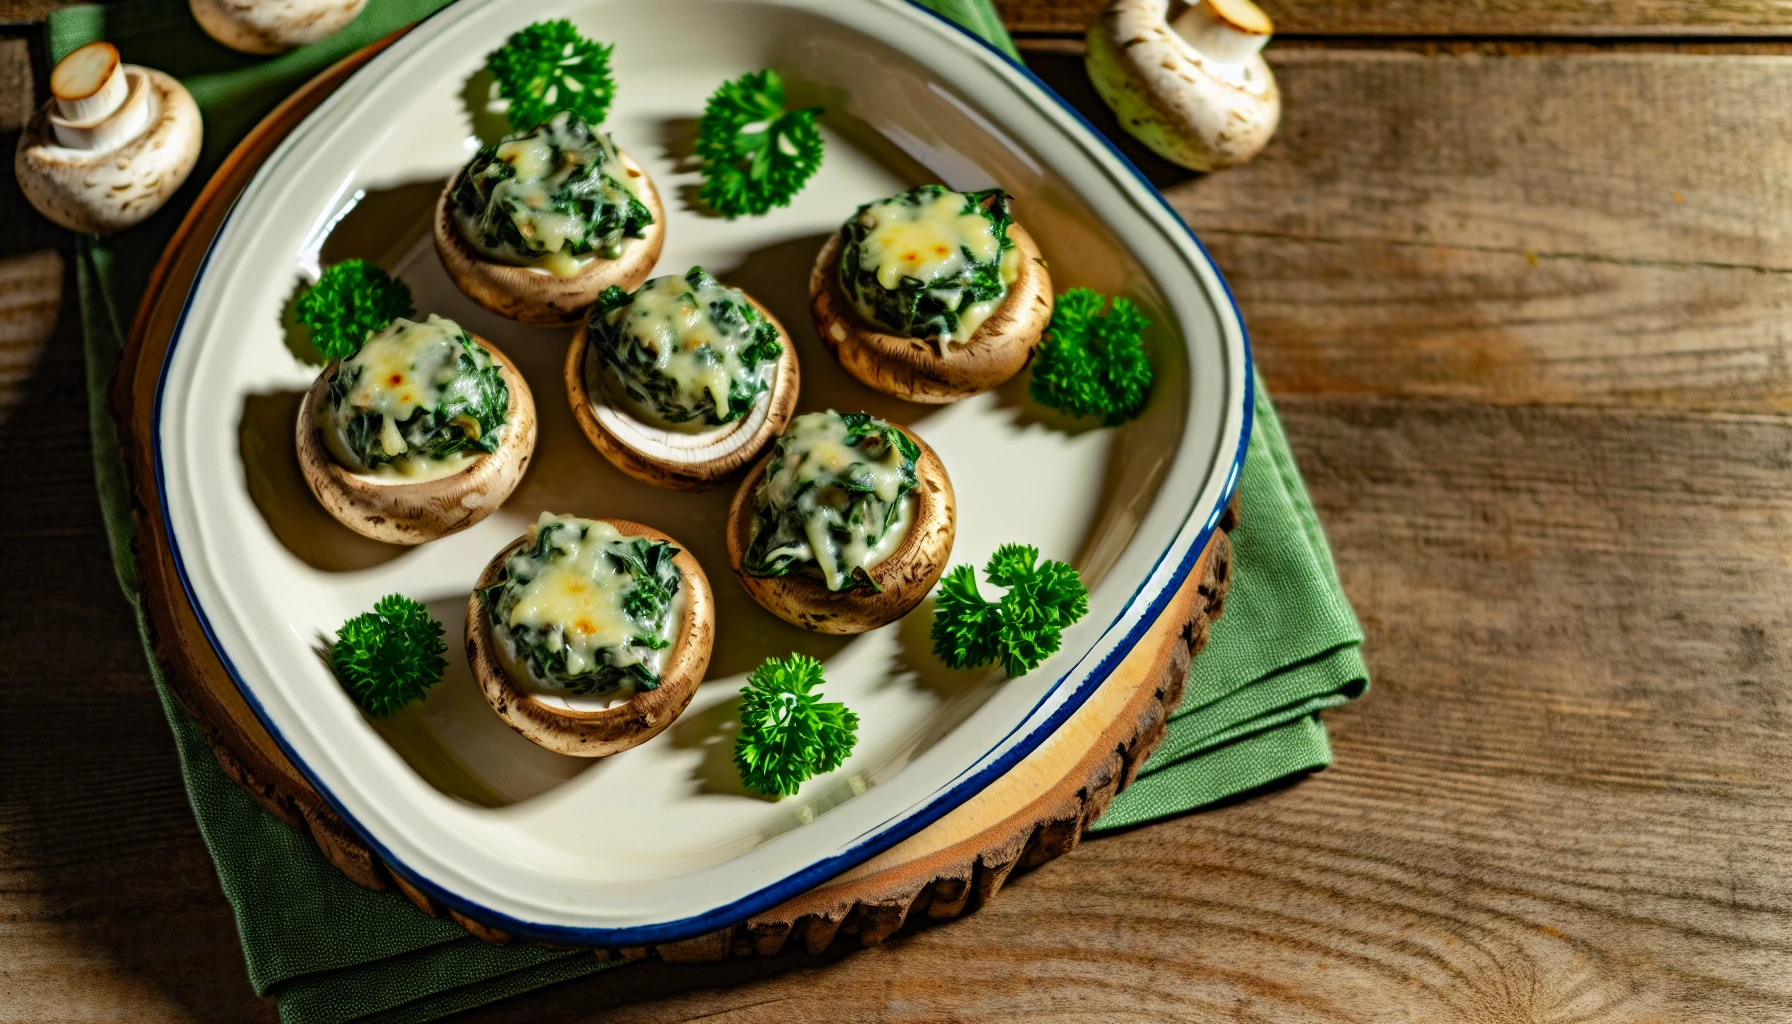 Spinach and cheese stuffed mushrooms